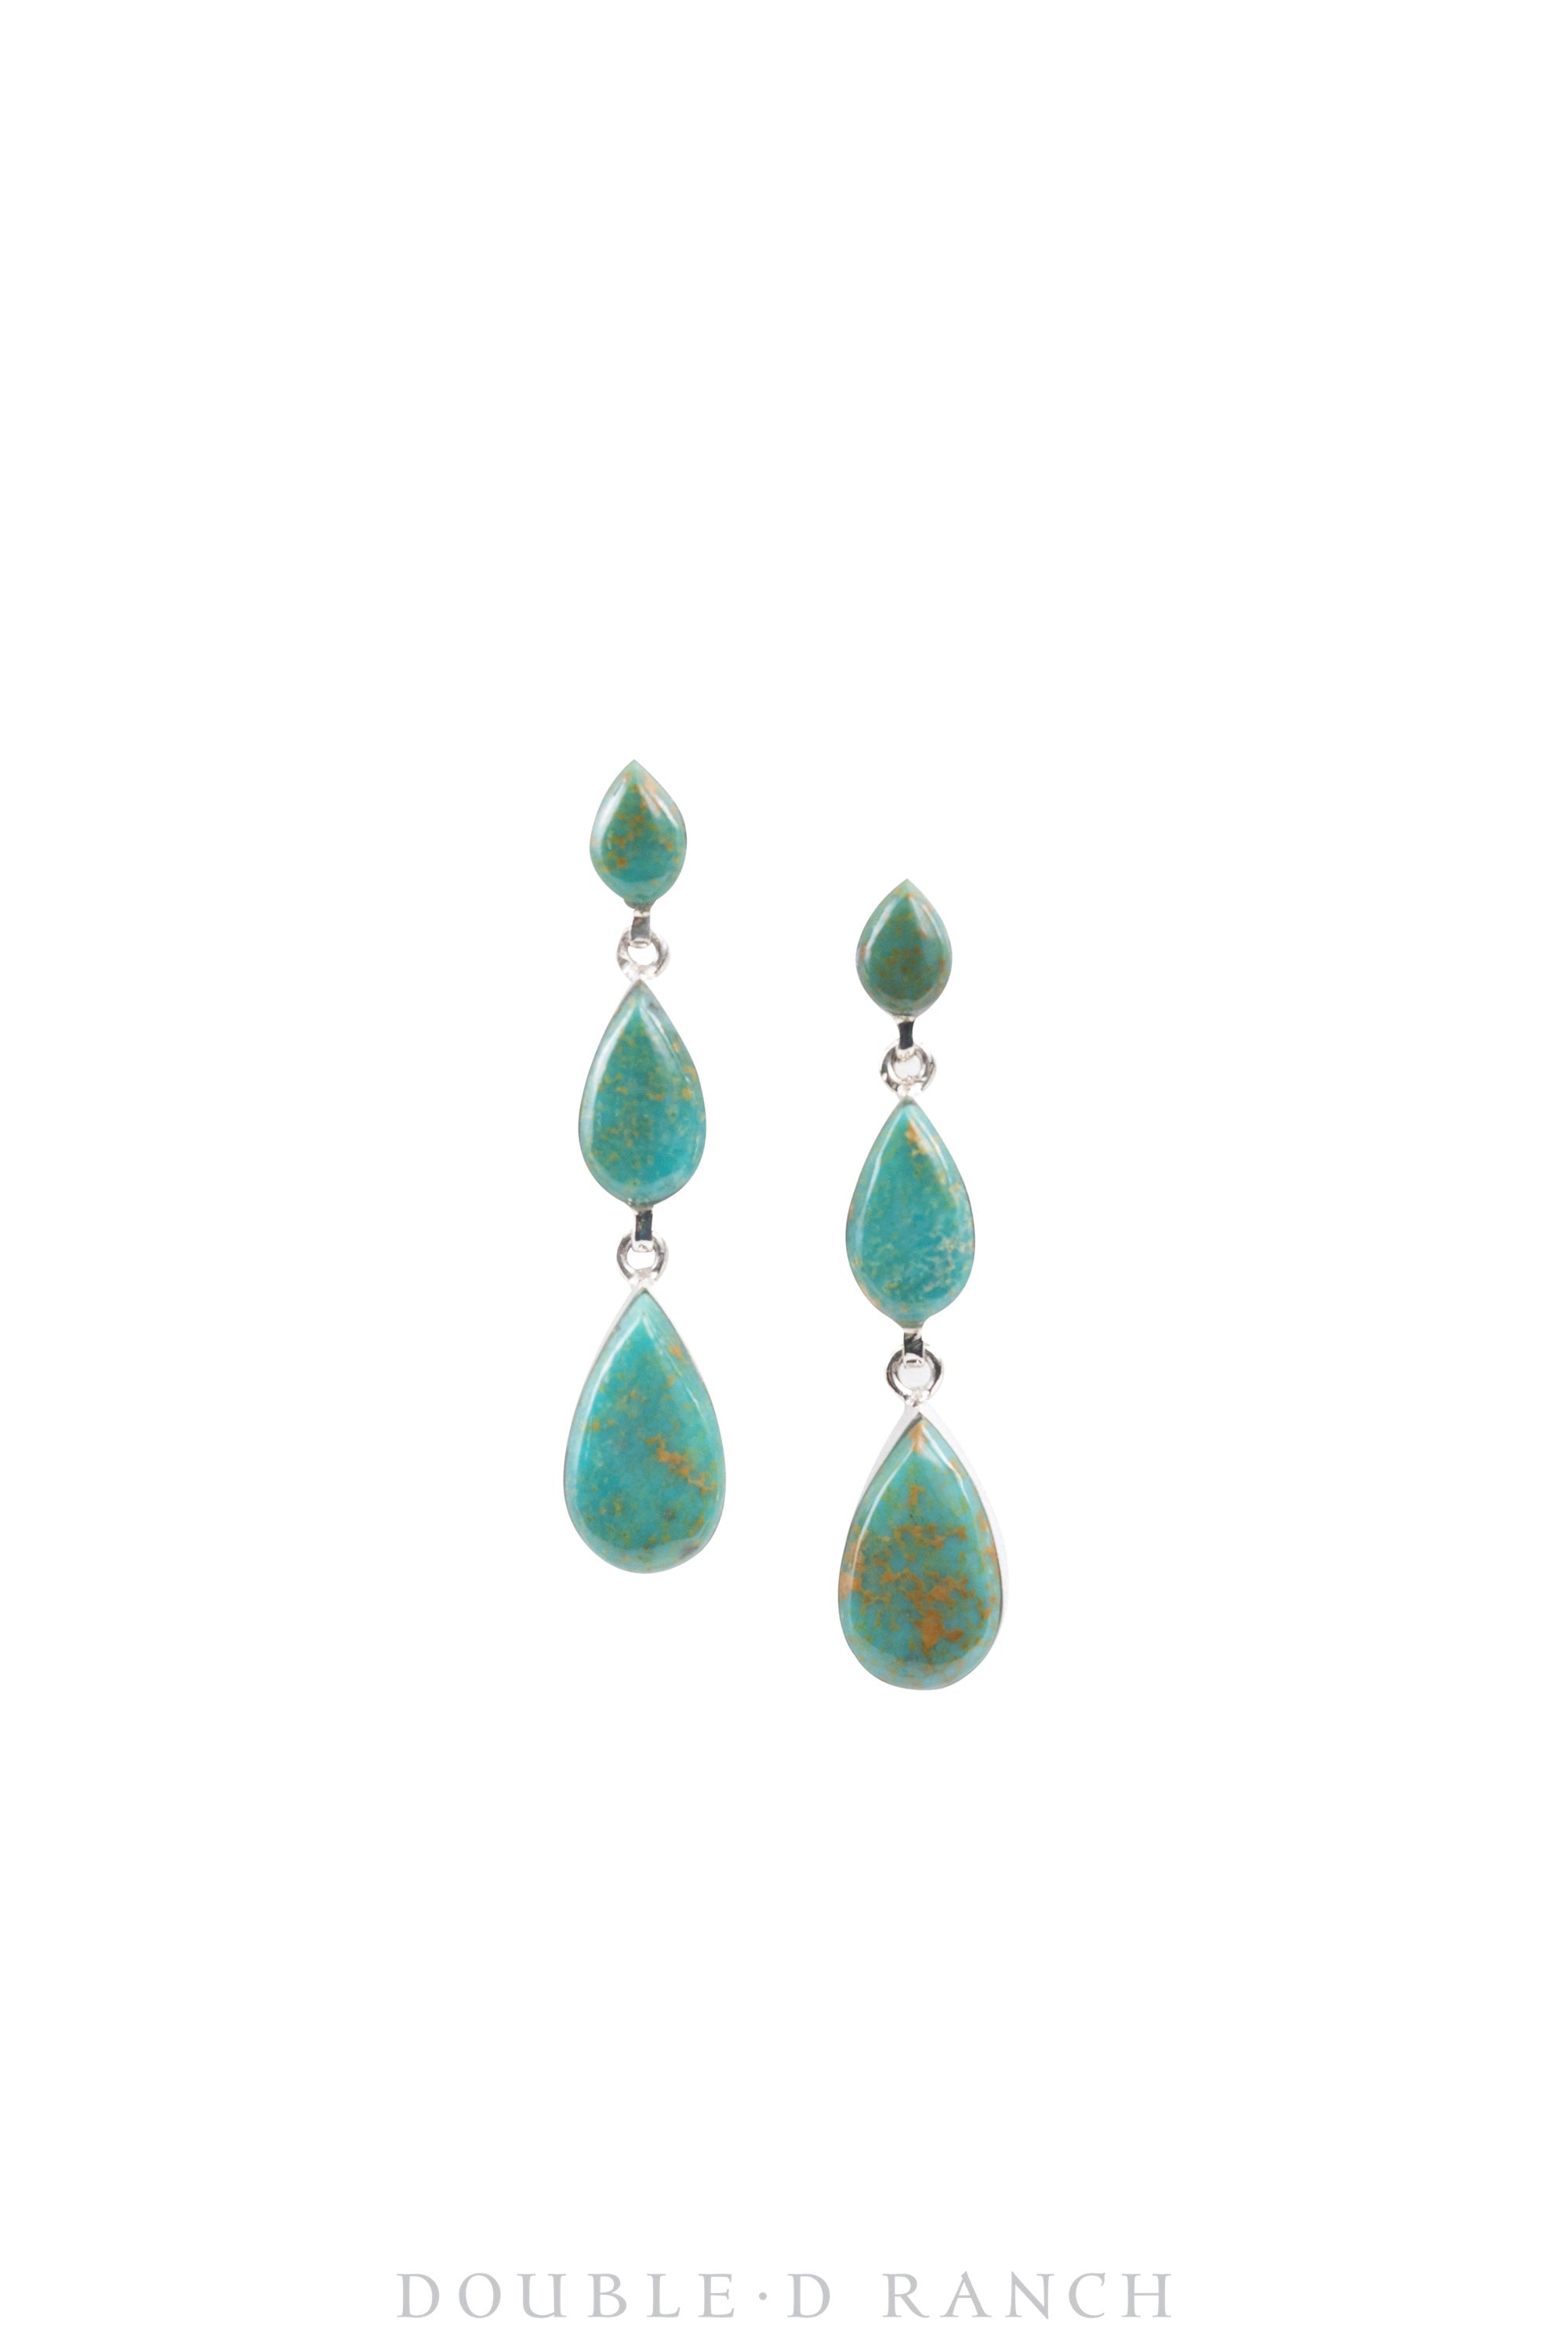 Earrings, Drops, Turquoise, Hallmark, Contemporary, 1429